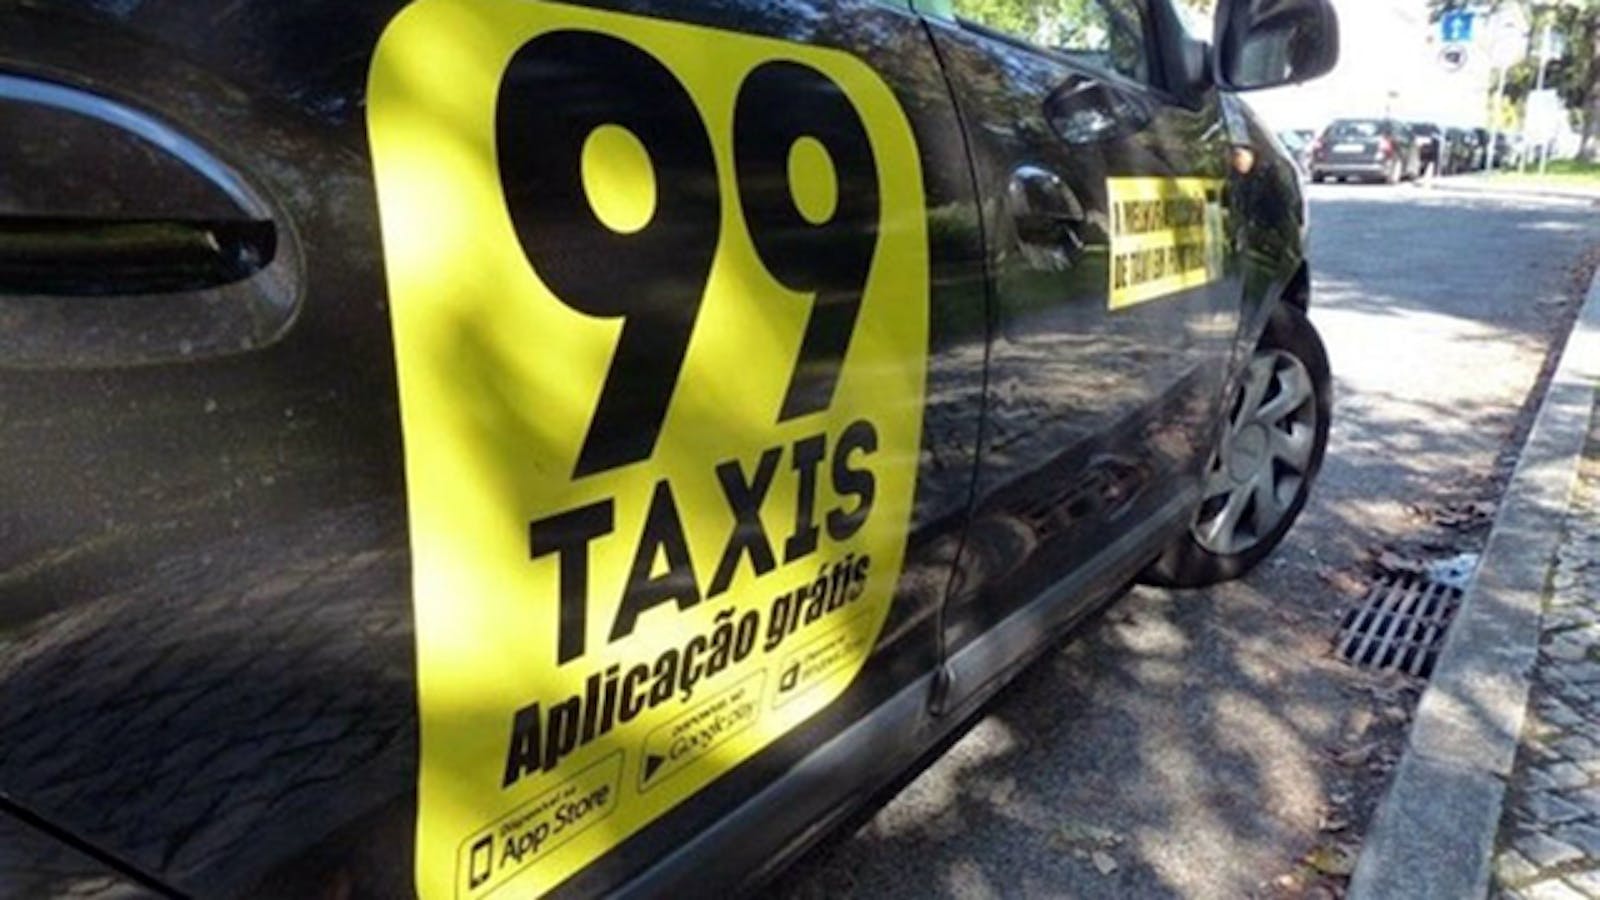 One of 99's taxis. Photo by Thetechnews.com